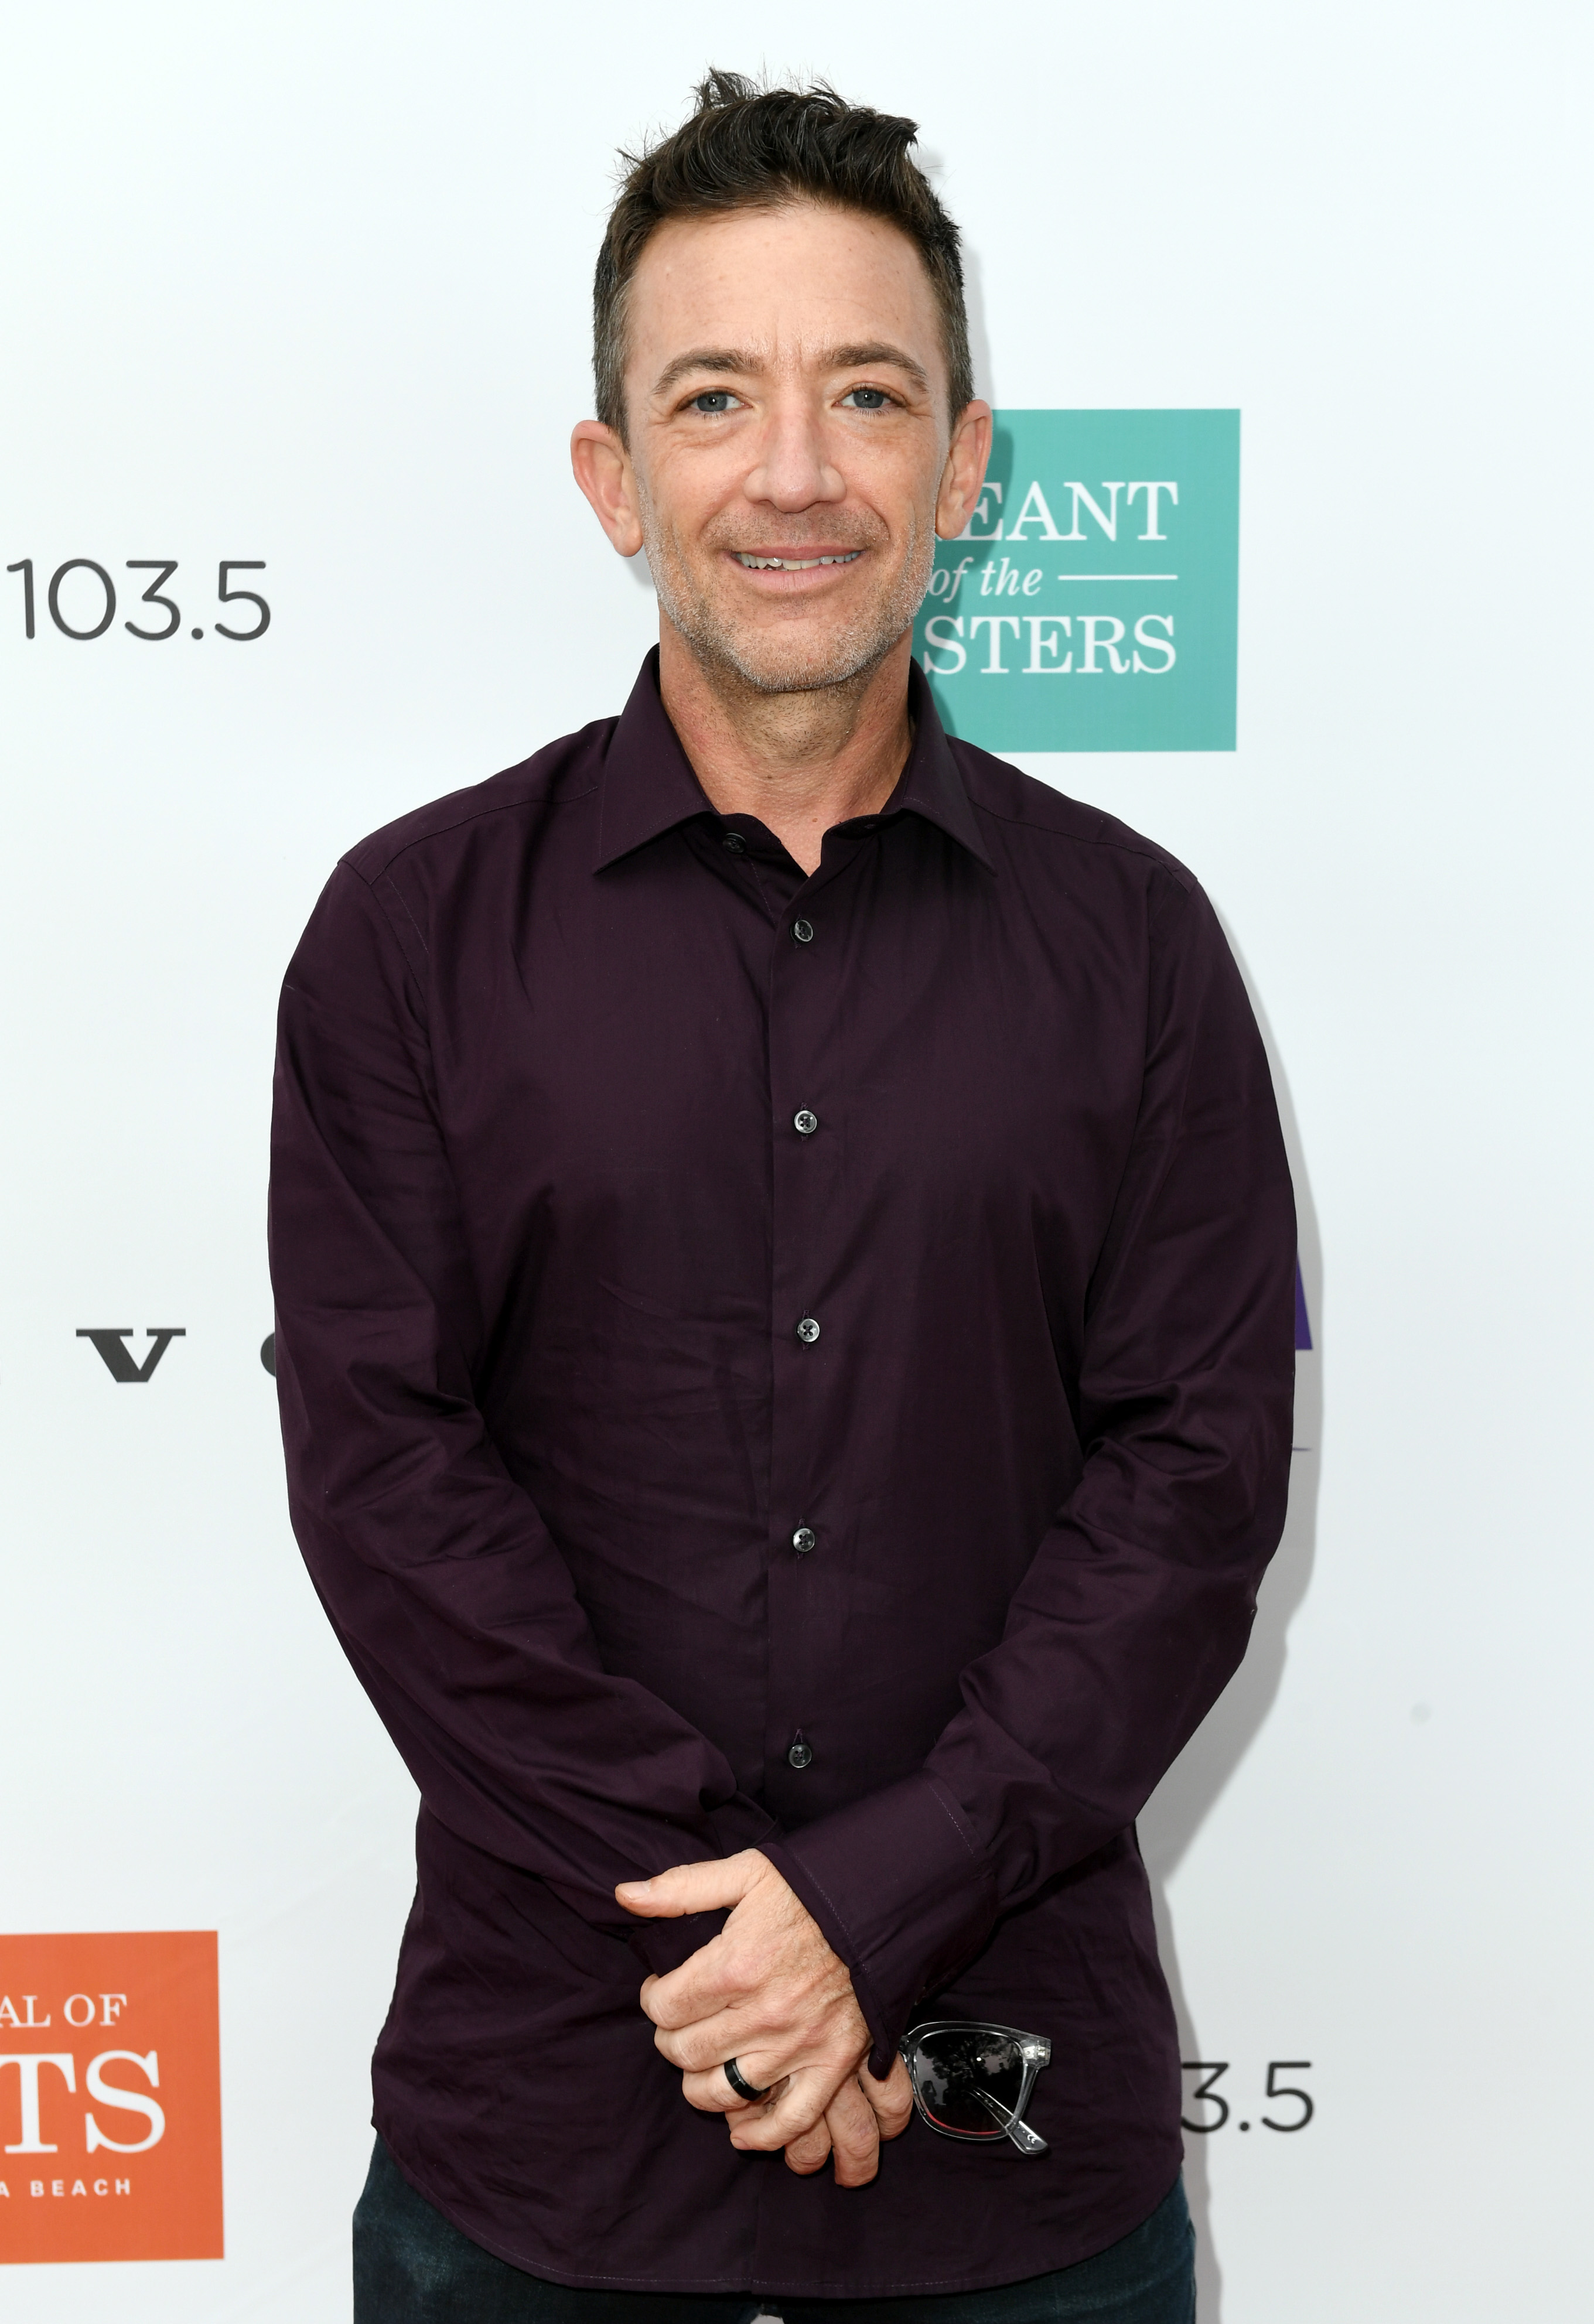 <p>David Faustino kept acting here and there after "Married... With Children" came to an end in 1997. More recently, he appeared as himself in the "Entourage" movie, reprised his role as Howard Green on "The Young and the Restless" for a few episodes in 2017 and has voiced characters in "The Legend of Korra," "DreamWorks Dragons" and "Dragons: Race to the Edge." David also dipped his feet into the music business: In the '90s, he released a rap album and started a weekly hip-hop party called Balistyx at the Whisky a Go Go on the Sunset Strip, where acts like N.W.A., KRS-One and will.i.am performed. David, who raps under the name Lil' Gweed, has also hosted "Old Scratch Radio Hour" and "Skee 24/7" on DashRadio.com. He was married to Andrea Elmer from 2004 to 2007. More recently, he's been in a relationship with Lindsay Bronson, with whom he welcomed daughter Ava in 2015 and son Cassius in 2022.</p>